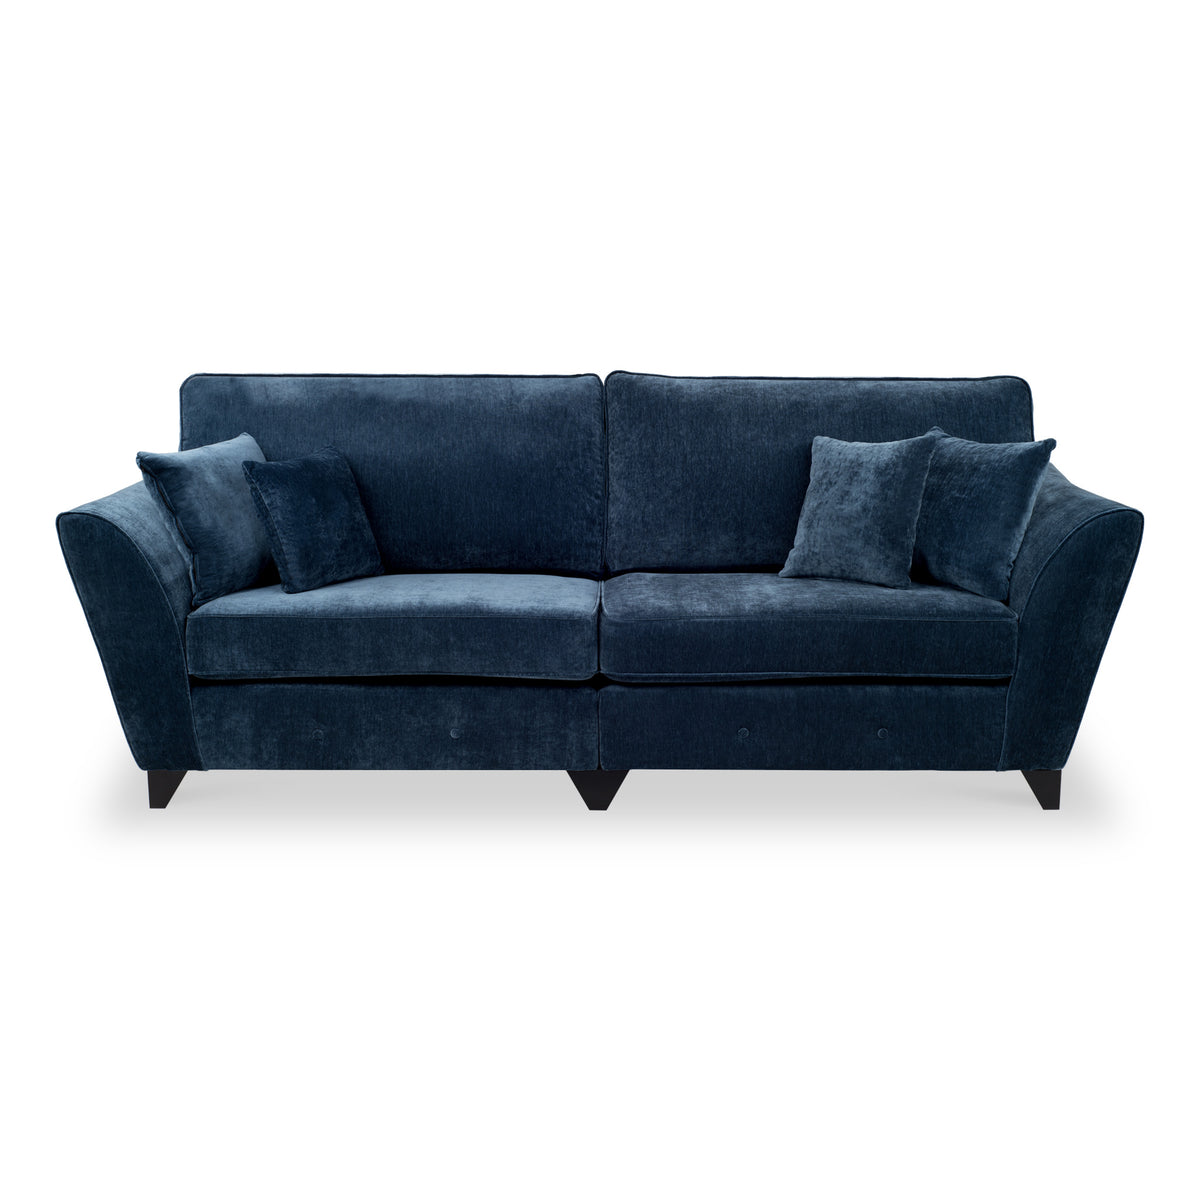 Harris 4 Seater Sofa in Navy by Roseland Furniture